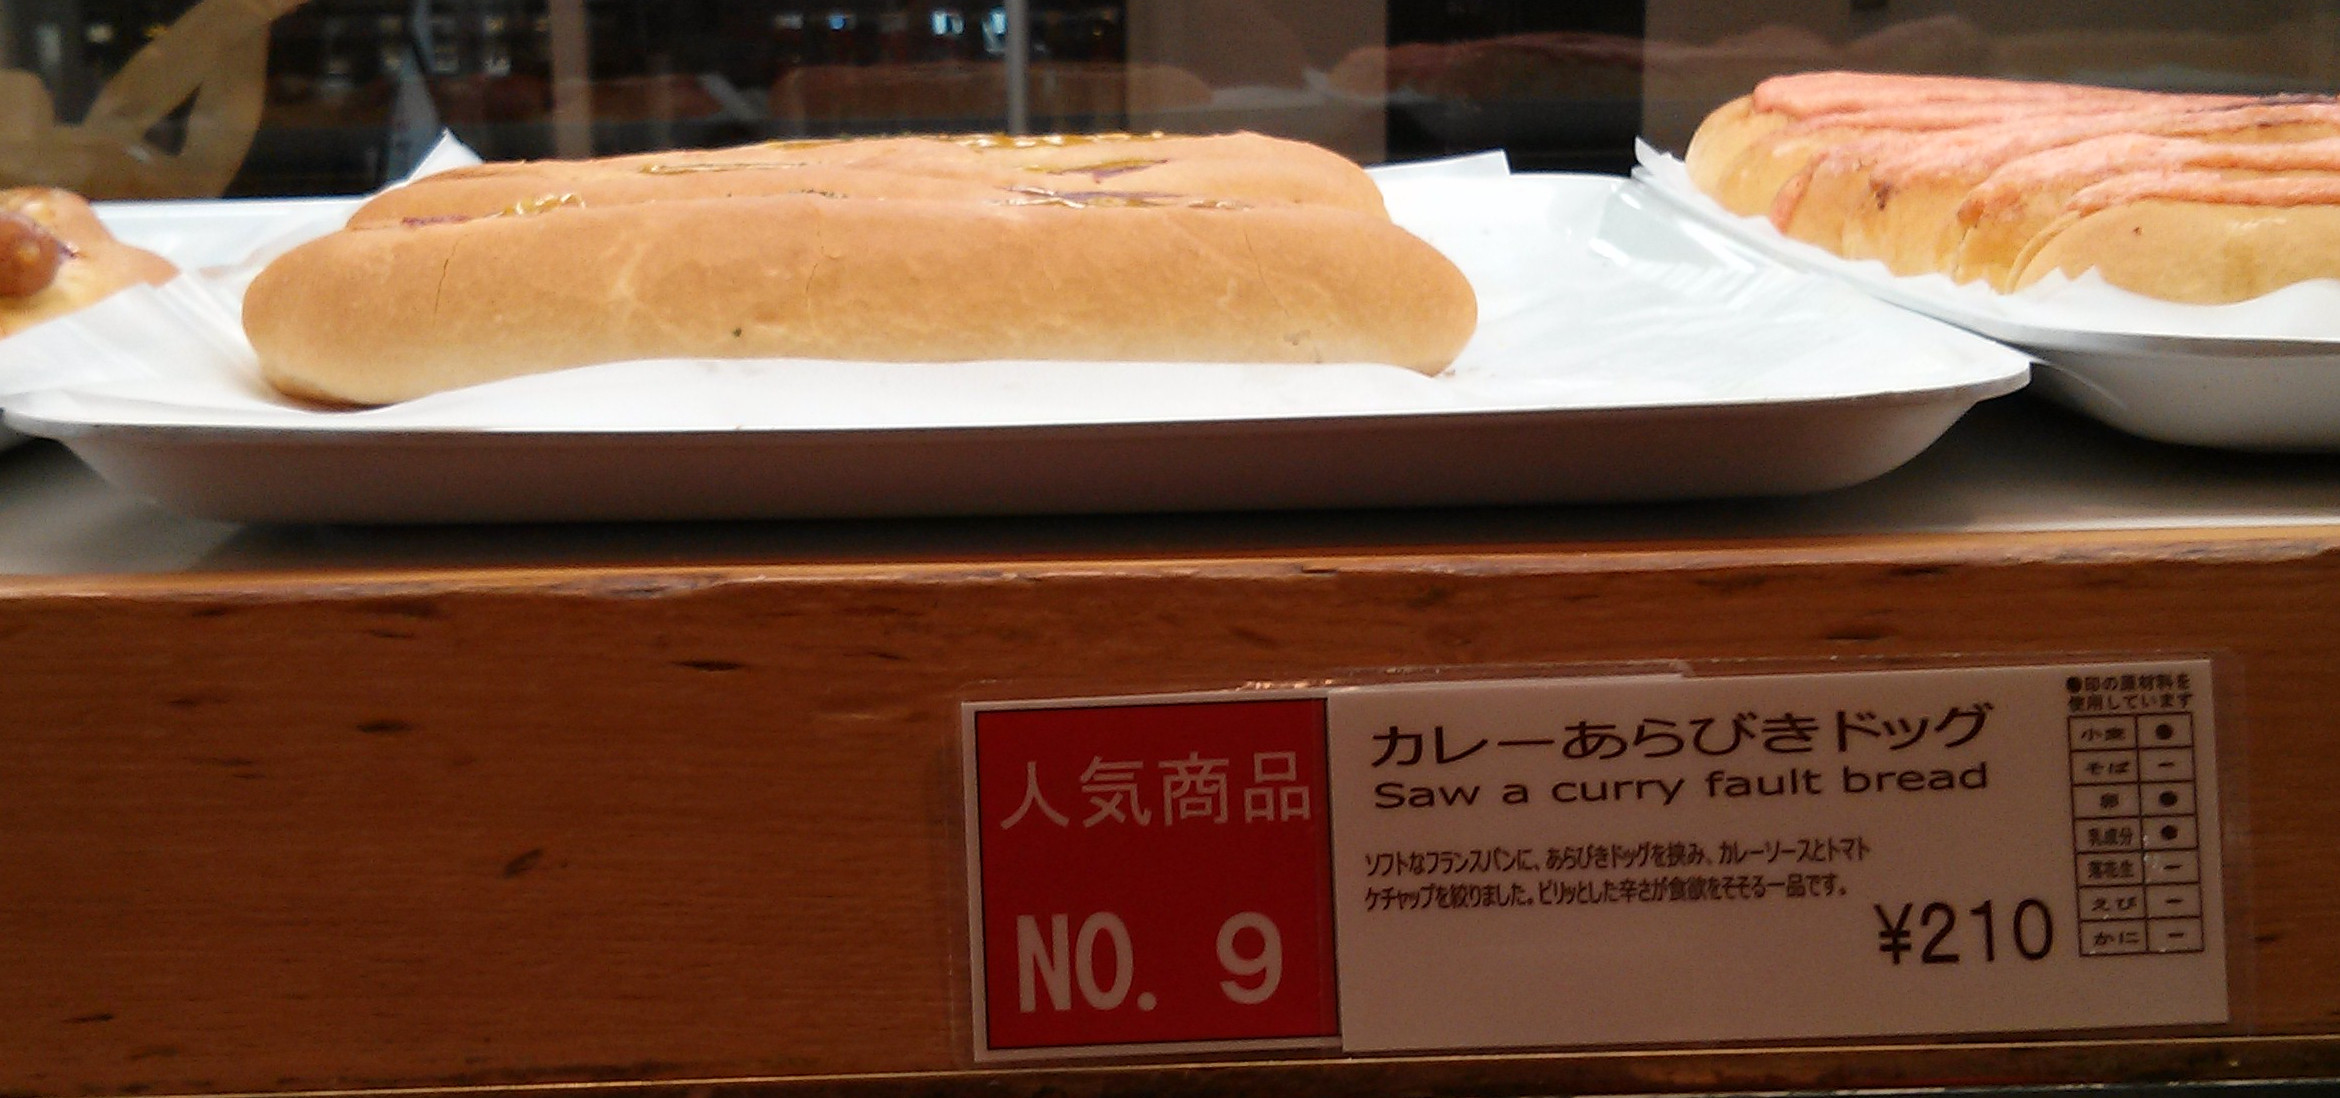 Saw a Curry Fault Bread